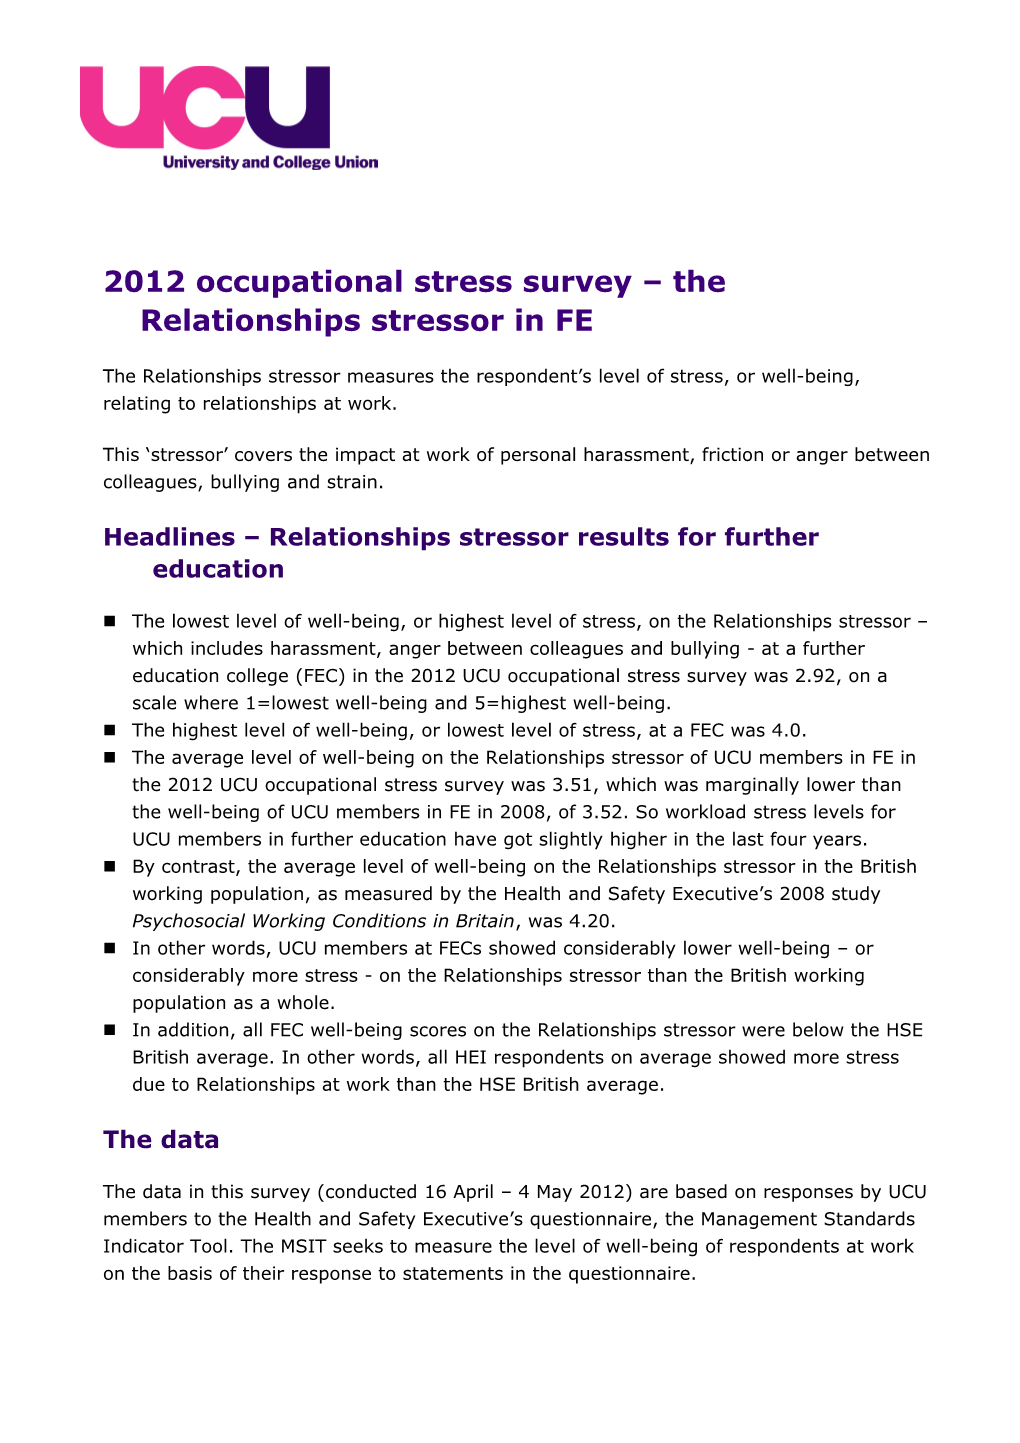 2012 Occupational Stress Survey the Relationships Stressor in FE